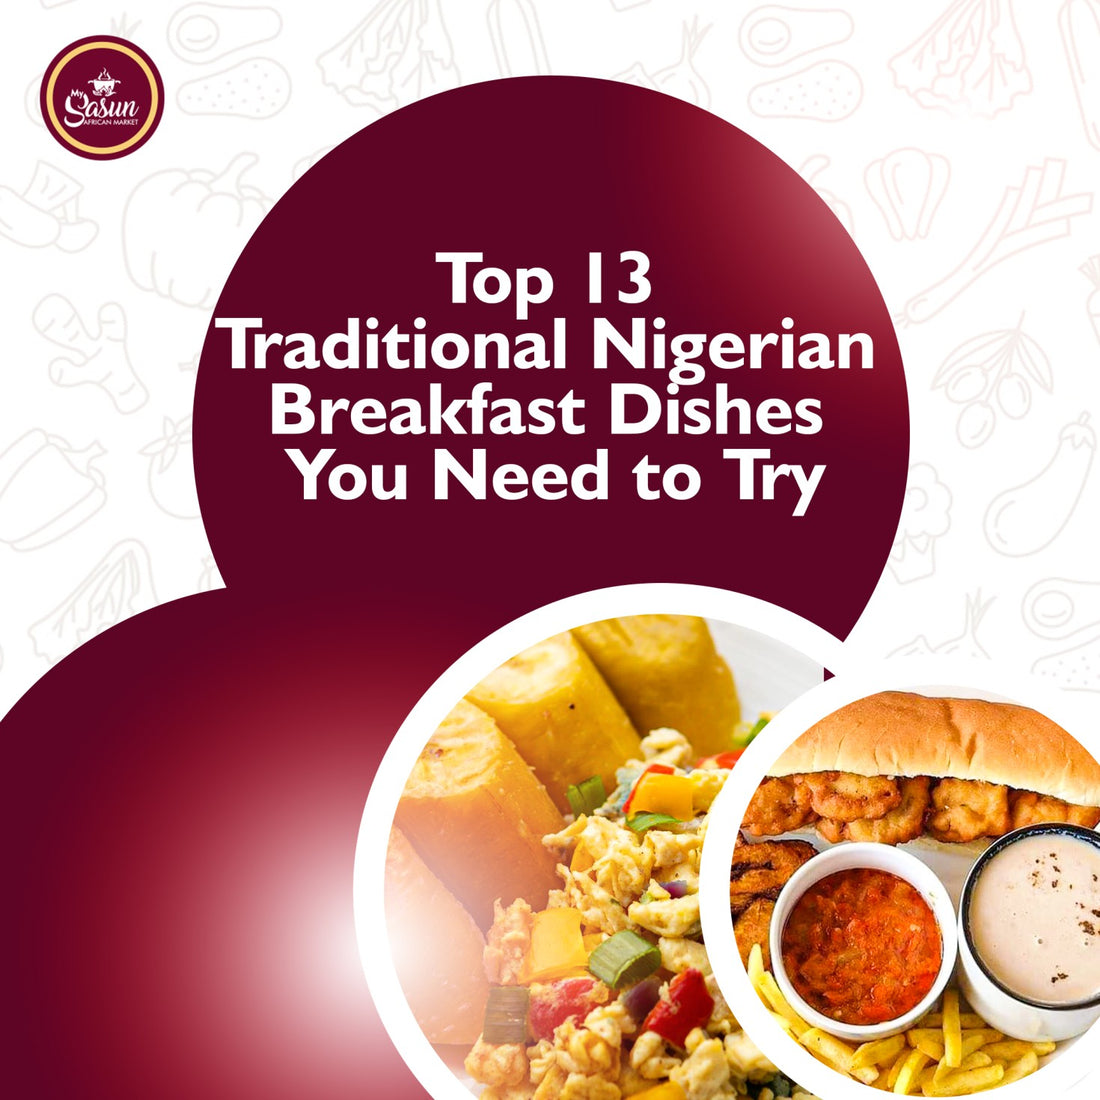 Top 13 Traditional Nigerian Breakfast Dishes You Need to Try